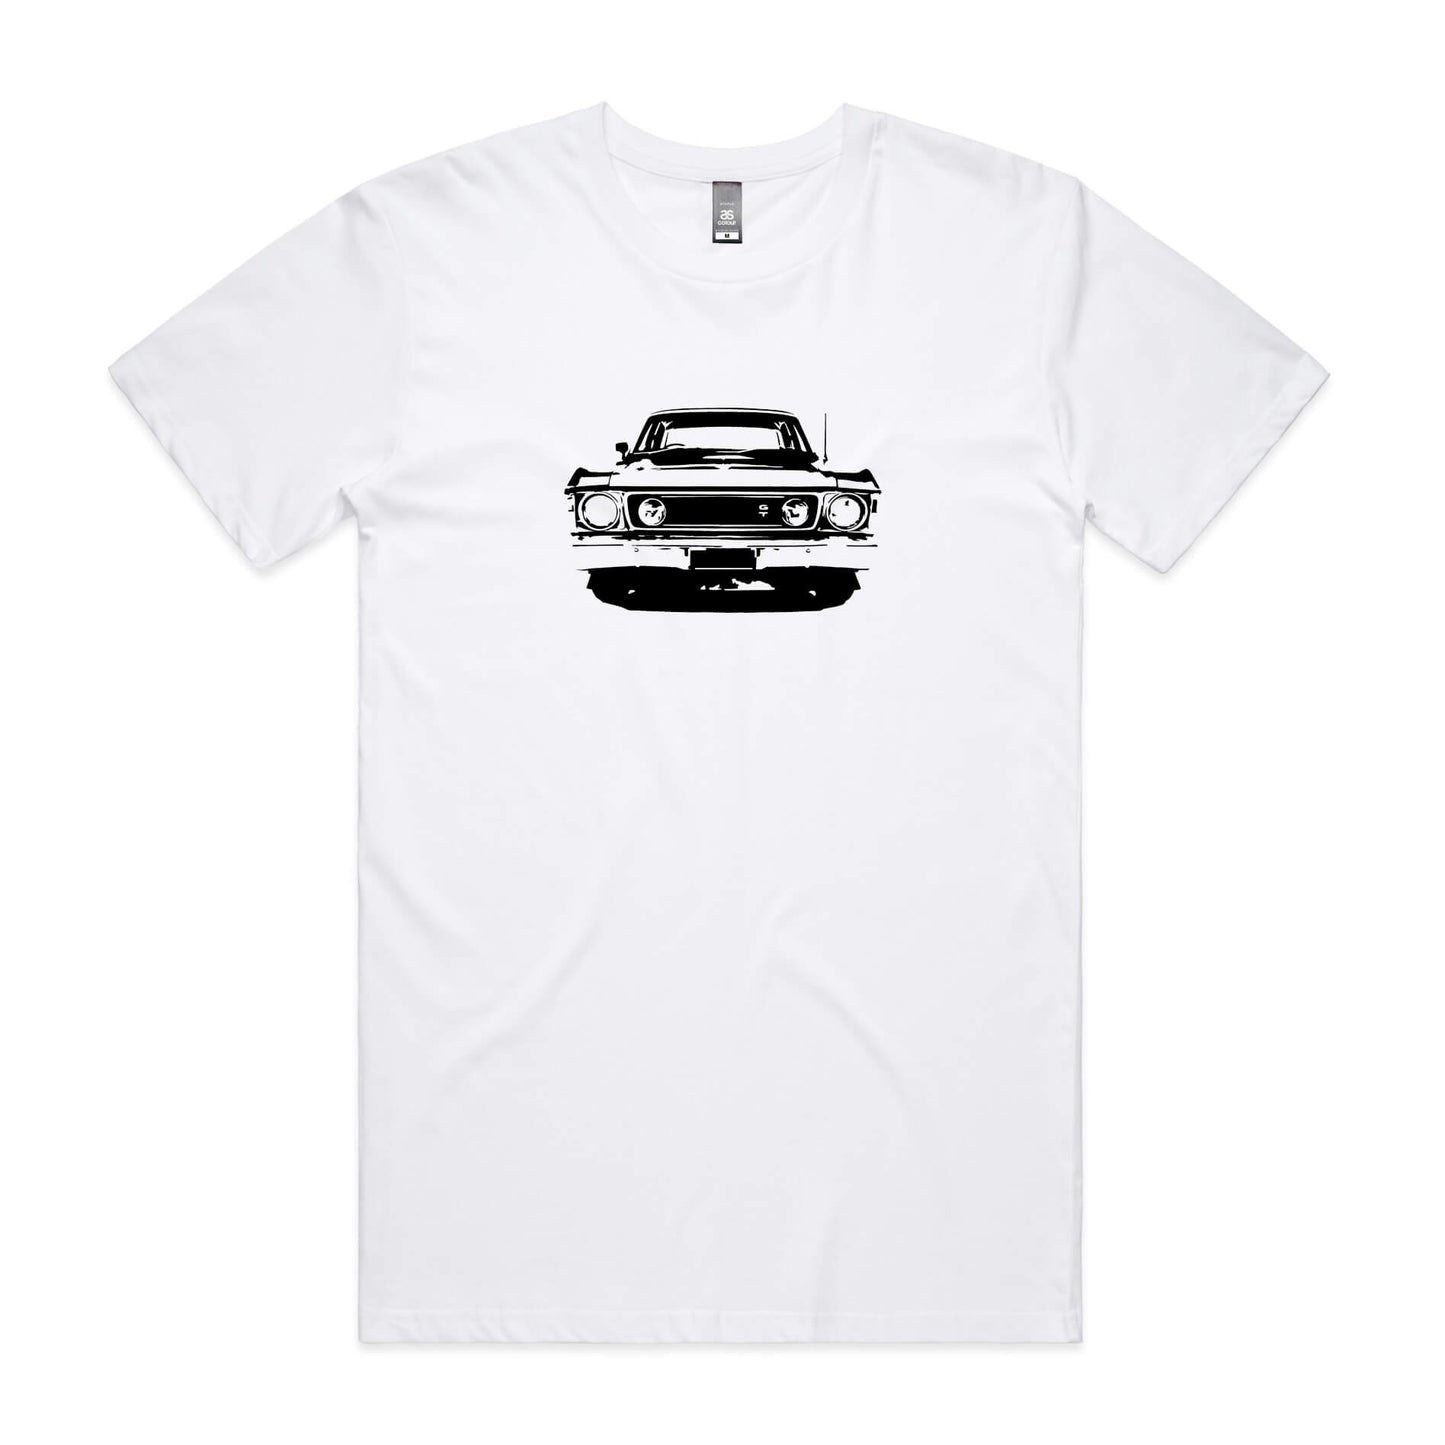 Ford XW Falcon t-shirt in white with black GT car graphic